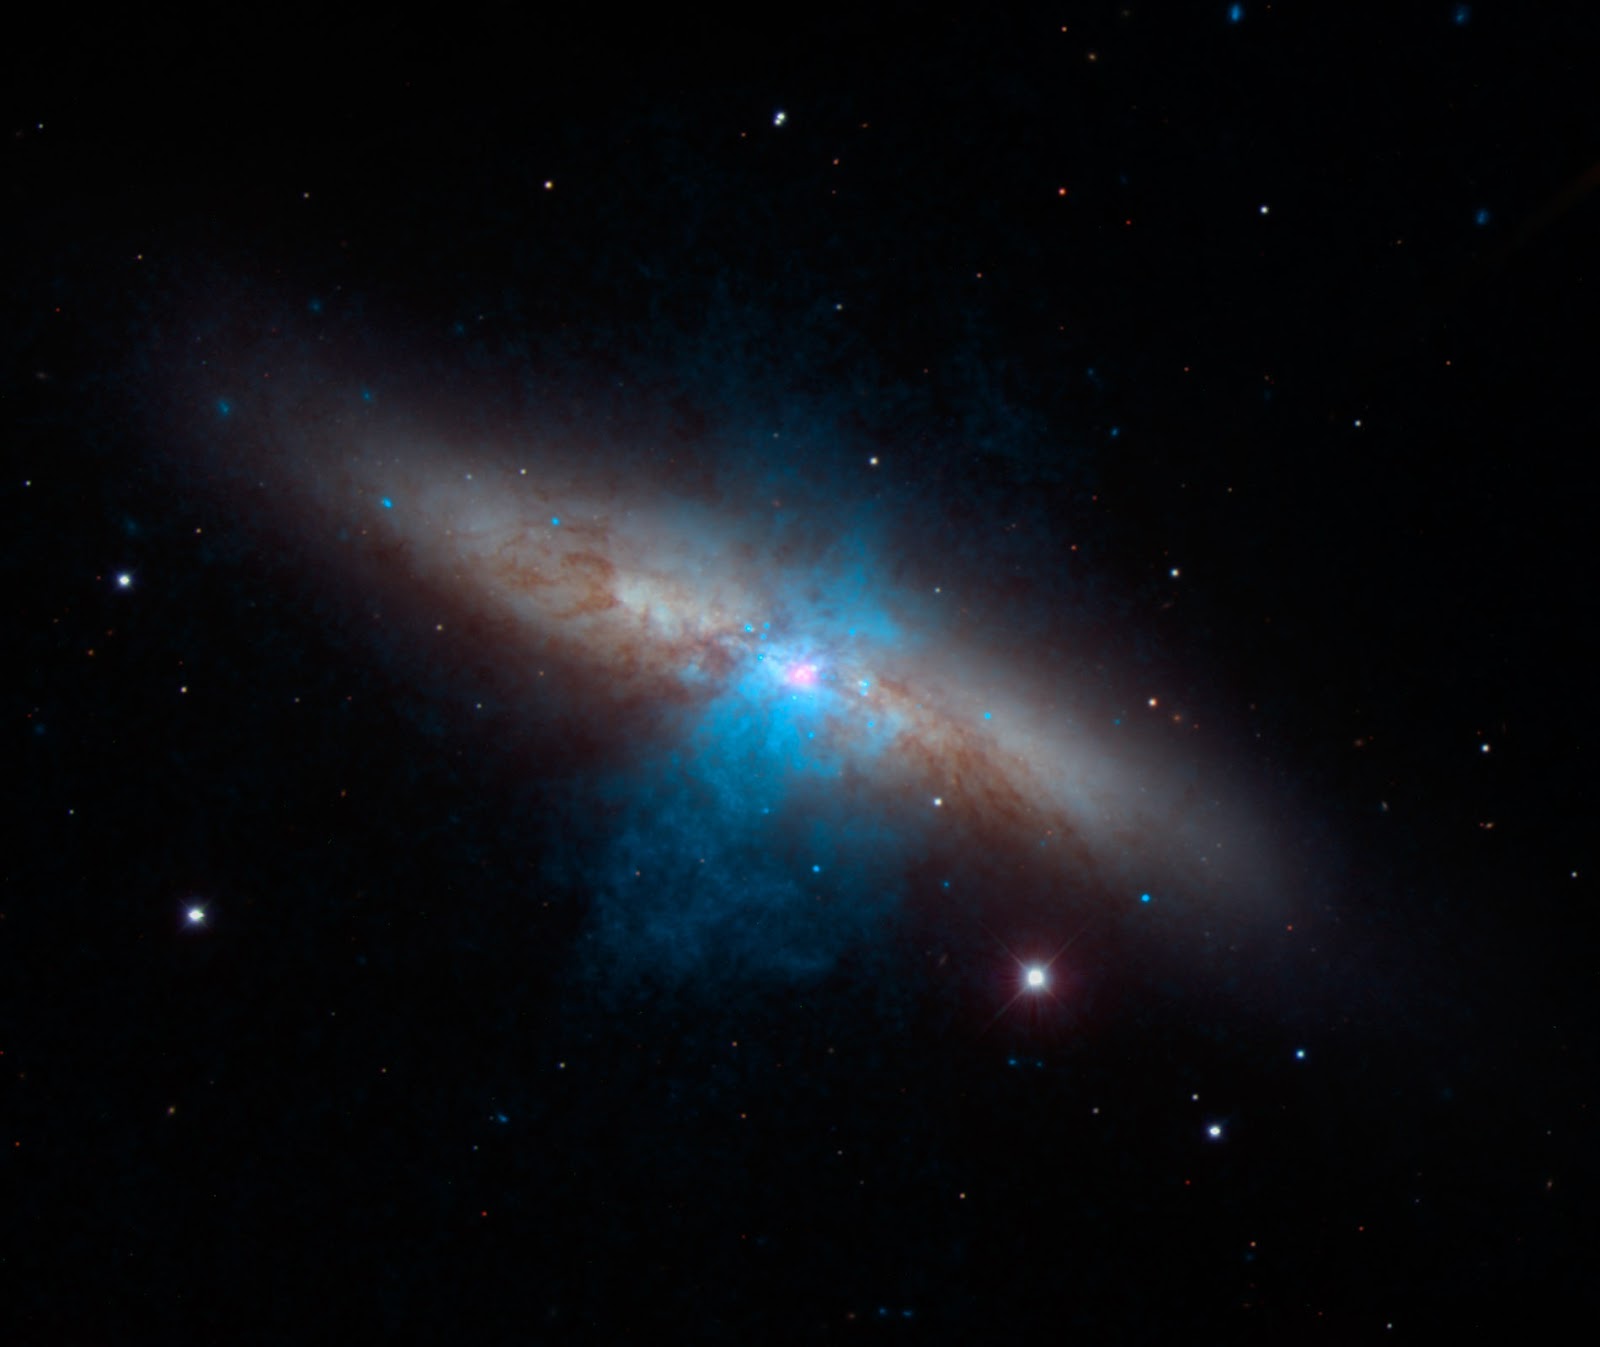 NASA’s NuSTAR Telescope Discovers Shockingly Bright Dead Star NASA’s NuSTAR Telescope Discovers Shockingly Bright Dead Star   Astronomers have found a pulsating, dead star beaming with the energy of about 10 million suns. This is the brightest pulsar – a dense stellar remnant left over from a supernova explosion – ever recorded. The discovery was made with NASA's Nuclear Spectroscopic Telescope Array, or NuSTAR.  "You might think of this pulsar as the 'Mighty Mouse' of stellar remnants," said Fiona Harrison, the NuSTAR principal investigator at the California Institute of Technology in Pasadena, California. "It has all the power of a black hole, but with much less mass."  The discovery appears in a new report in the Thursday Oct. 9 issue of the journal Nature.  The surprising find is helping astronomers better understand mysterious sources of blinding X-rays, called ultraluminous X-ray sources (ULXs). Until now, all ULXs were thought to be black holes. The new data from NuSTAR show at least one ULX, about 12 million light-years away in the galaxy Messier 82 (M82), is actually a pulsar.  "The pulsar appears to be eating the equivalent of a black hole diet," said Harrison. "This result will help us understand how black holes gorge and grow so quickly, which is an important event in the formation of galaxies and structures in the universe."  ULXs are generally thought to be black holes feeding off companion stars -- a process called accretion. They also are suspected to be the long-sought after "medium-size" black holes – missing links between smaller, stellar-size black holes and the gargantuan ones that dominate the hearts of most galaxies. But research into the true nature of ULXs continues toward more definitive answers.  NuSTAR did not initially set out to study the two ULXs in M82. Astronomers had been observing a recent supernova in the galaxy when they serendipitously noticed pulses of bright X-rays coming from the ULX known as M82 X-2. Black holes do not pulse, but pulsars do.  Pulsars belong to a class of stars called neutron stars. Like black holes, neutron stars are the burnt-out cores of exploded stars, but puny in mass by comparison. Pulsars send out beams of radiation ranging from radio waves to ultra-high-energy gamma rays. As the star spins, these beams intercept Earth like lighthouse beacons, producing a pulsed signal.  "We took it for granted that the powerful ULXs must be massive black holes," said lead study author Matteo Bachetti, of the University of Toulouse in France. "When we first saw the pulsations in the data, we thought they must be from another source."  NASA's Chandra X-ray Observatory and Swift satellite also have monitored M82 to study the same supernova, and confirmed the intense X-rays of M82 X-2 were coming from a pulsar.  "Having a diverse array of telescopes in space means that they can help each other out," said Paul Hertz, director of NASA's astrophysics division in Washington. "When one telescope makes a discovery, others with complementary capabilities can be called in to investigate it at different wavelengths."  The key to NuSTAR's discovery was its sensitivity to high-energy X-rays, as well as its ability to precisely measure the timing of the signals, which allowed astronomers to measure a pulse rate of 1.37 seconds. They also measured its energy output at the equivalent of 10 million suns, or 10 times more than that observed from other X-ray pulsars. This is a big punch for something about the mass of our sun and the size of Pasadena.  How is this puny, dead star radiating so fiercely? Astronomers are not sure, but they say it is likely due to a lavish feast of the cosmic kind. As is the case with black holes, the gravity of a neutron star can pull matter off companion stars. As the matter is dragged onto the neutron star, it heats up and glows with X-rays. If the pulsar is indeed feeding off surrounding matter, it is doing so at such an extreme rate to have theorists scratching their heads.  Astronomers are planning follow-up observations with NASA's NuSTAR, Swift and Chandra spacecraft to find an explanation for the pulsar’s bizarre behavior. The NuSTAR team also will look at more ULXs, meaning they could turn up more pulsars. At this point, it is not clear whether M82 X-2 is an oddball or if more ULXs beat with the pulse of dead stars. NuSTAR, a relatively small telescope, has thrown a big loop into the mystery of black holes.  “In the news recently, we have seen that another source of unusually bright X-rays in the M82 galaxy seems to be a medium-sized black hole," said astronomer Jeanette Gladstone of the University of Alberta, Canada, who is not affiliated with the study. "Now, we find that the second source of bright X-rays in M82 isn’t a black hole at all. This is going to challenge theorists and pave the way for a new understanding of the diversity of these fascinating objects."  Image Credit: NASA/JPL-Caltech Explanation from: http://www.nasa.gov/press/2014/october/nasa-s-nustar-telescope-discovers-shockingly-bright-dead-star/index.html